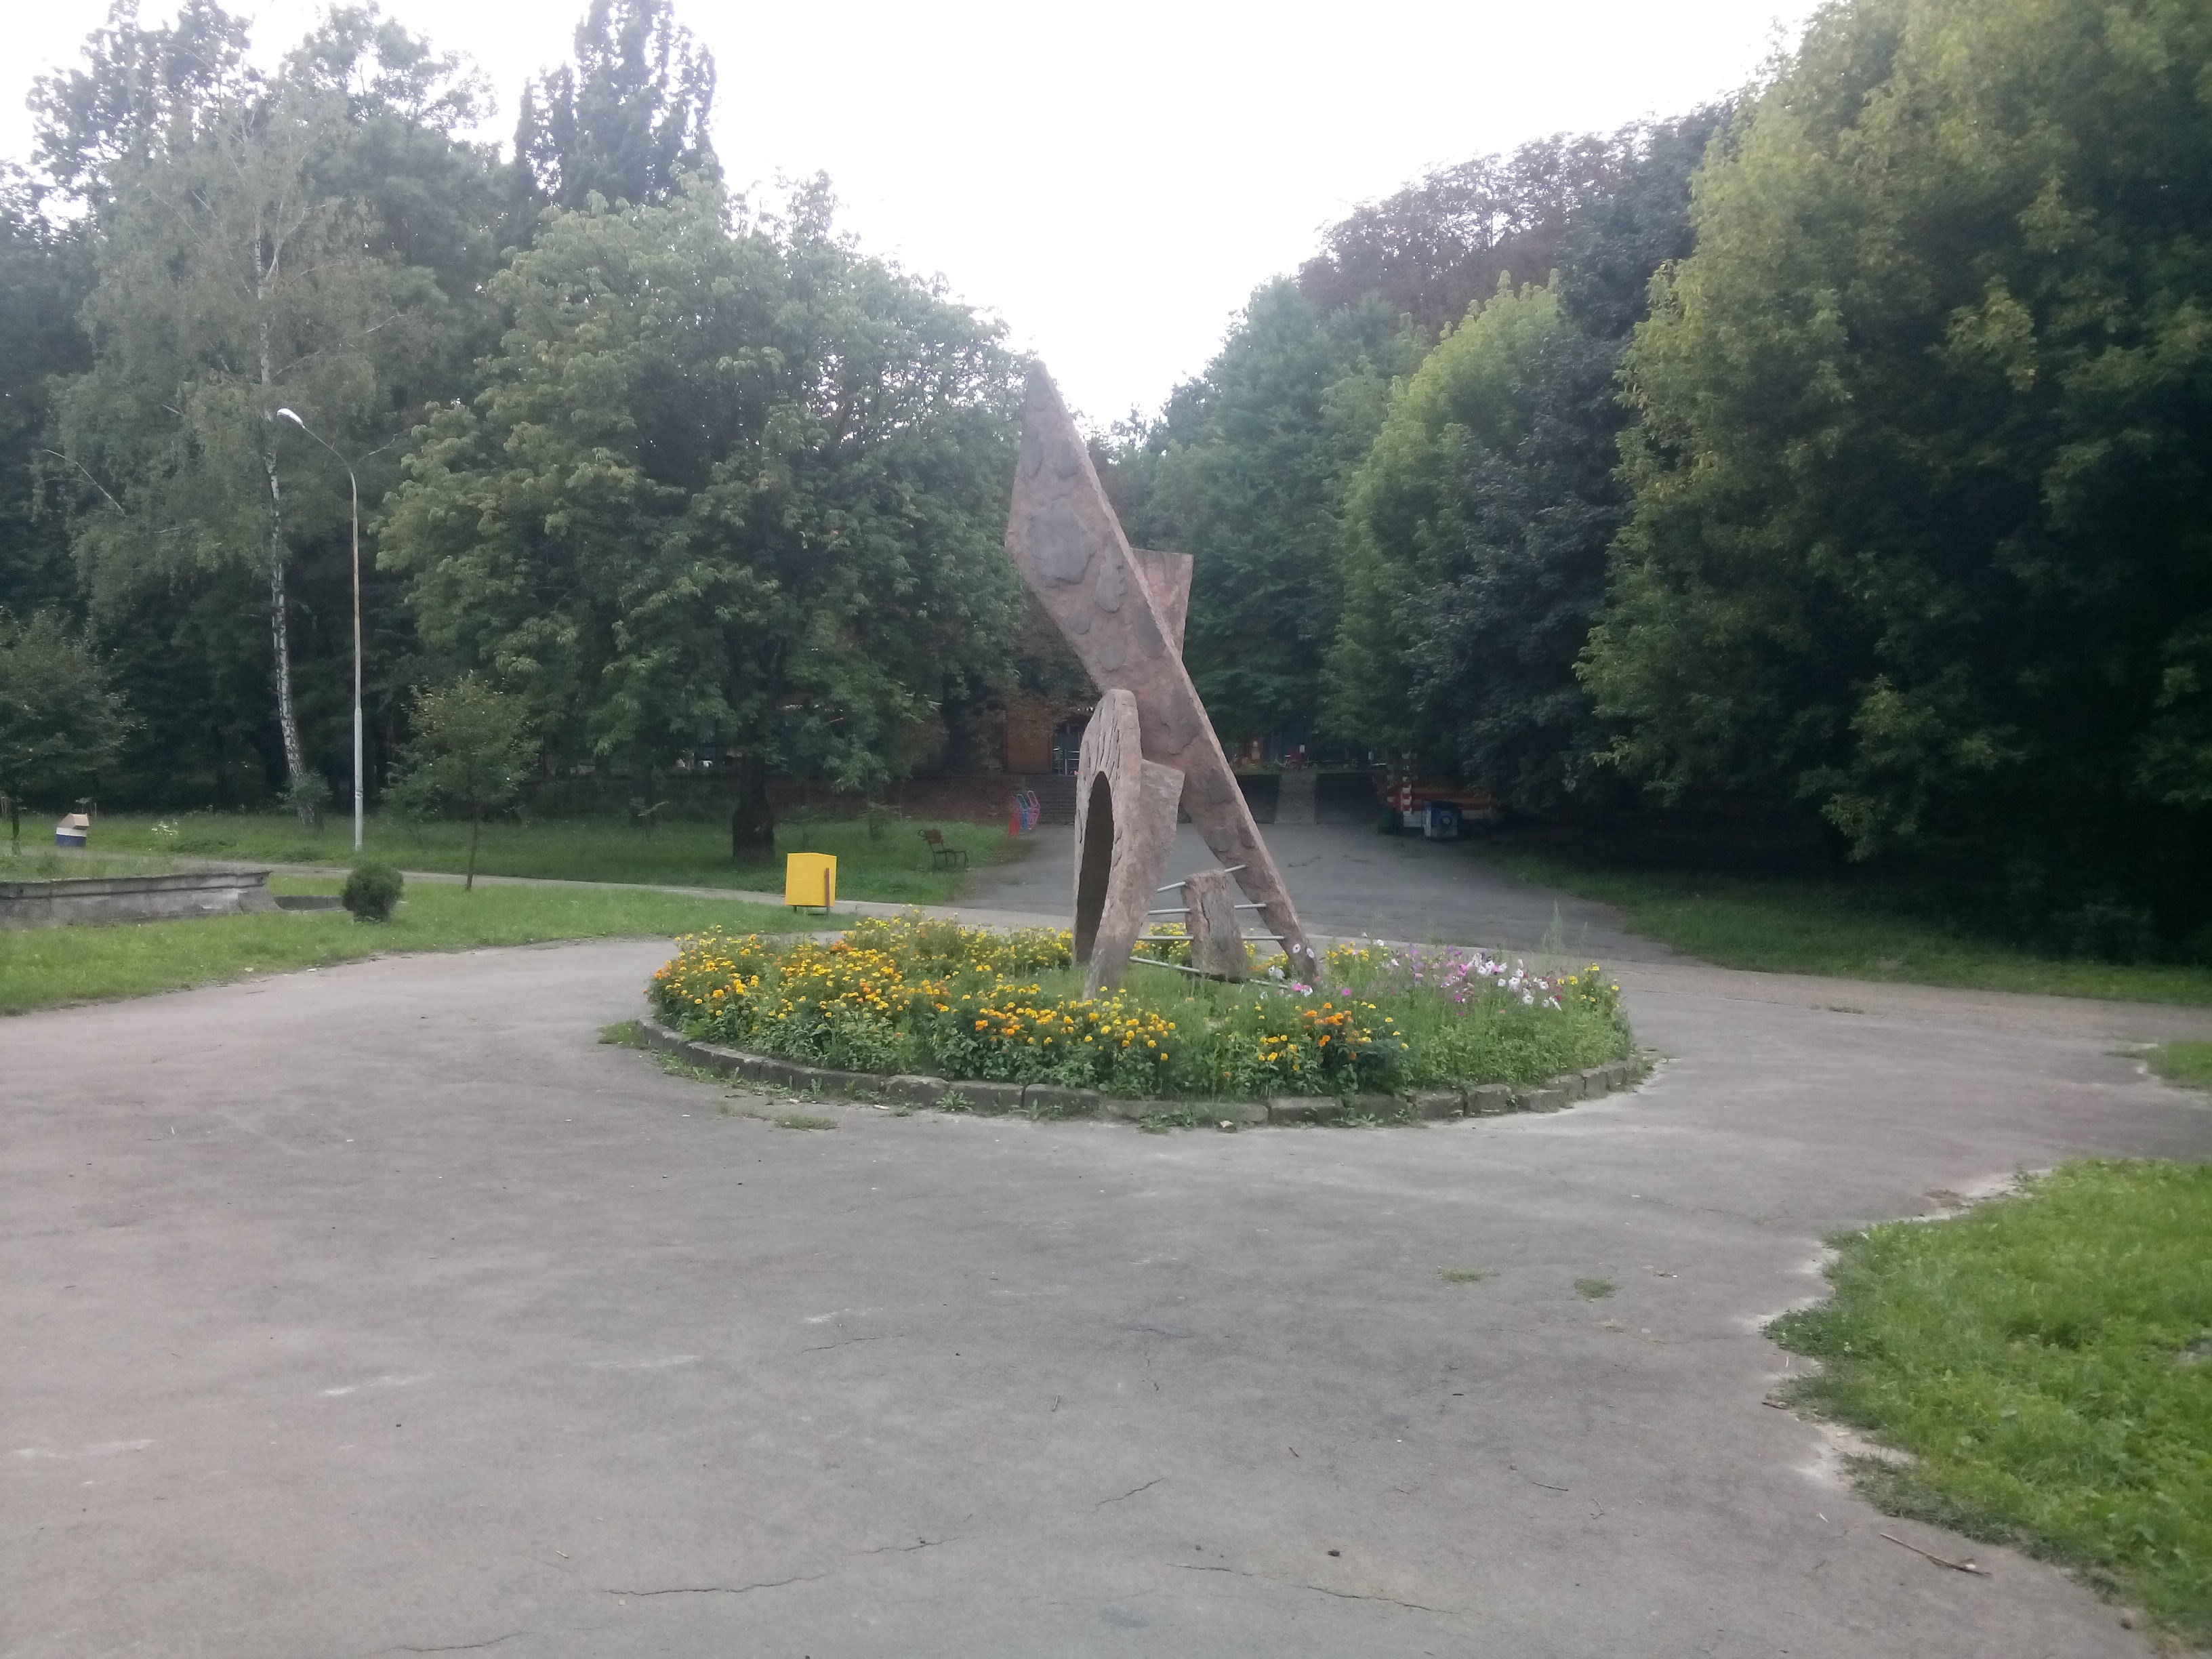 An abstract sculpture in the middle of a pedestrian roundabout, with trees in the background